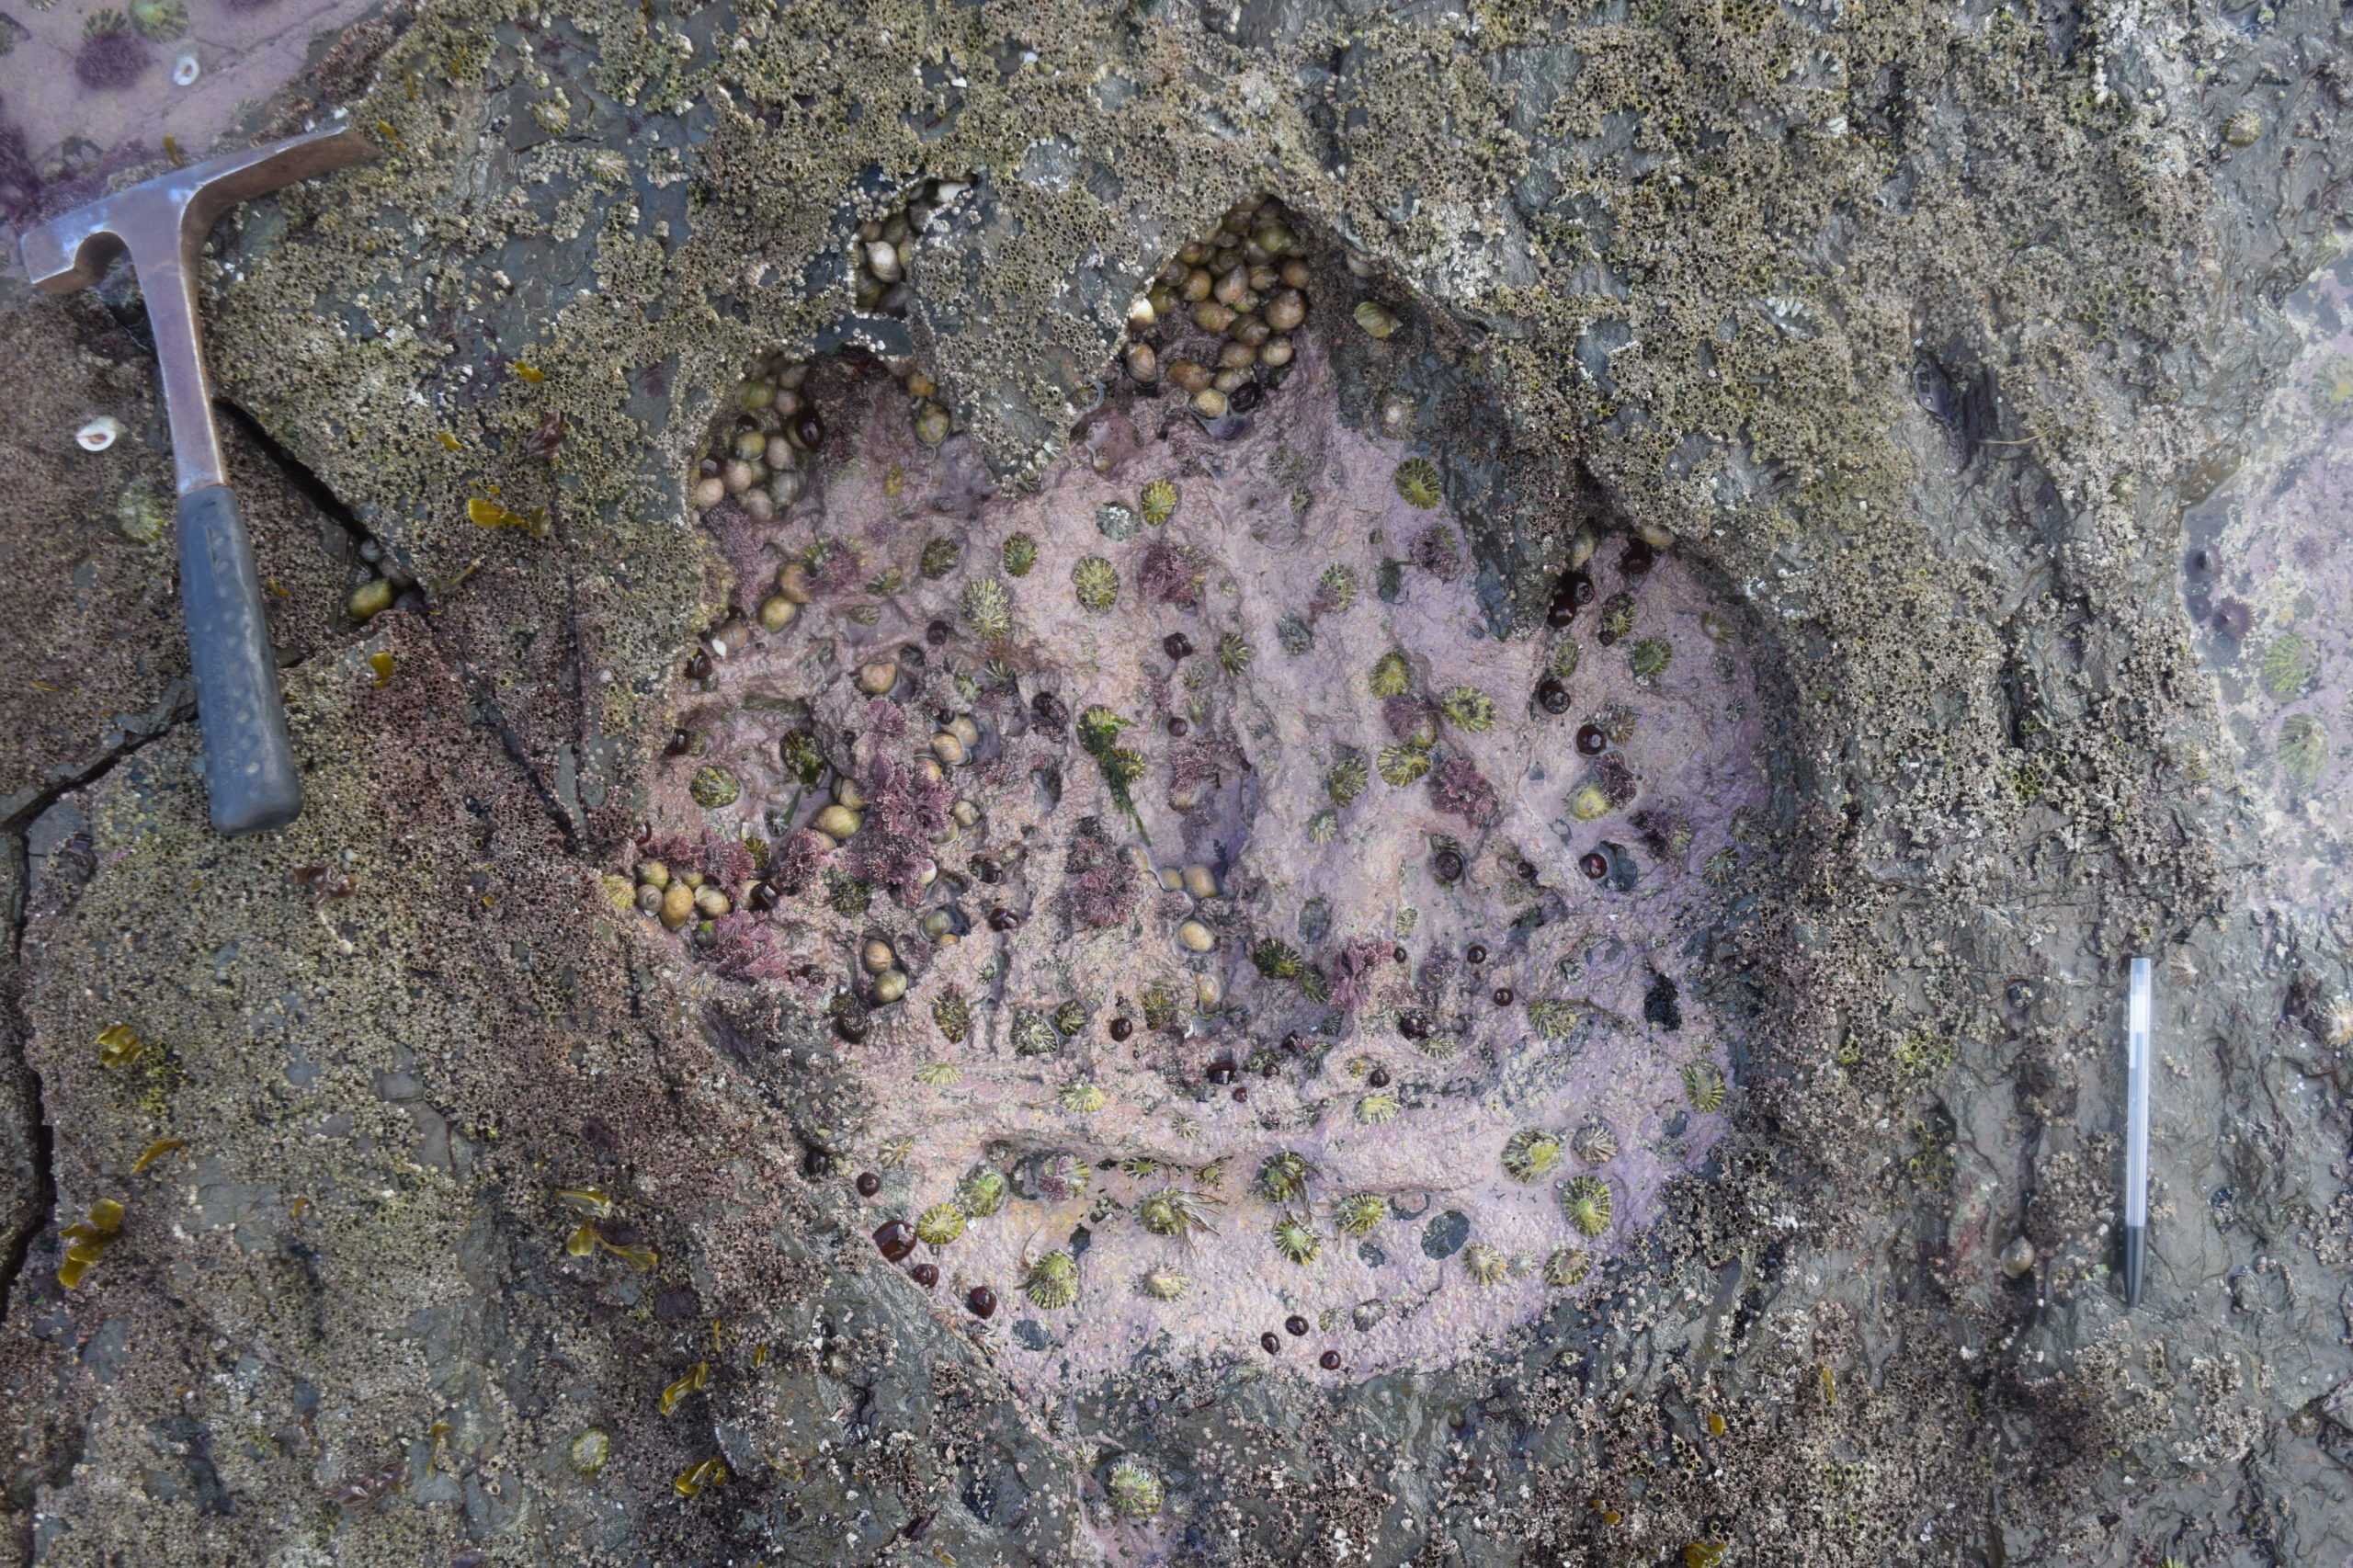 A 170 million year old footprint made by sauropod dinosaur, found on the Isle of Syke